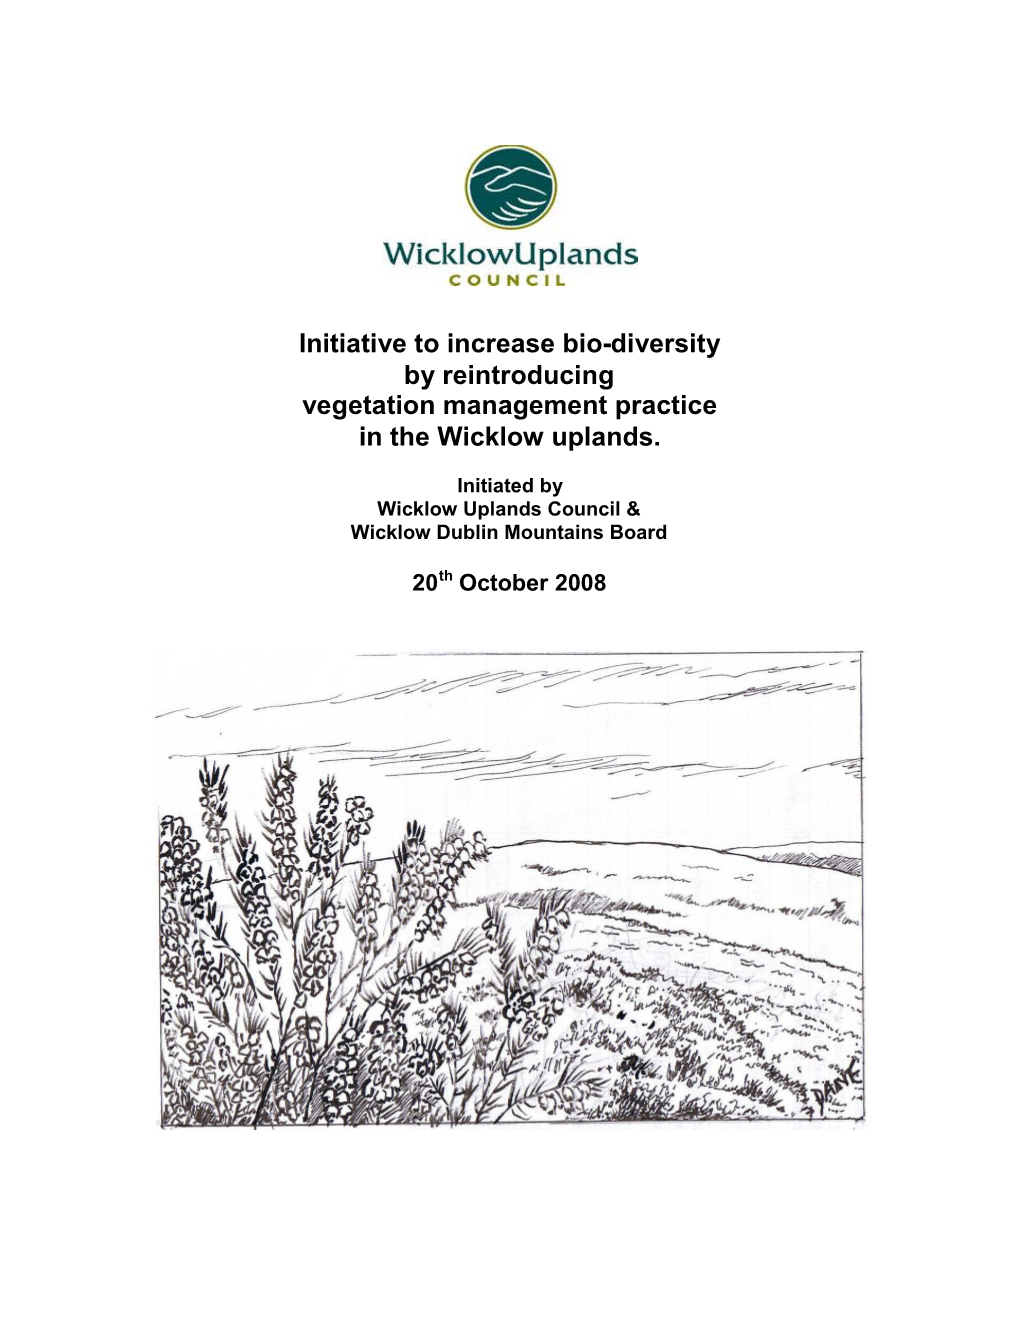 Initiative to Increase Bio-Diversity by Reintroducing Vegetation Management Practice in the Wicklow Uplands